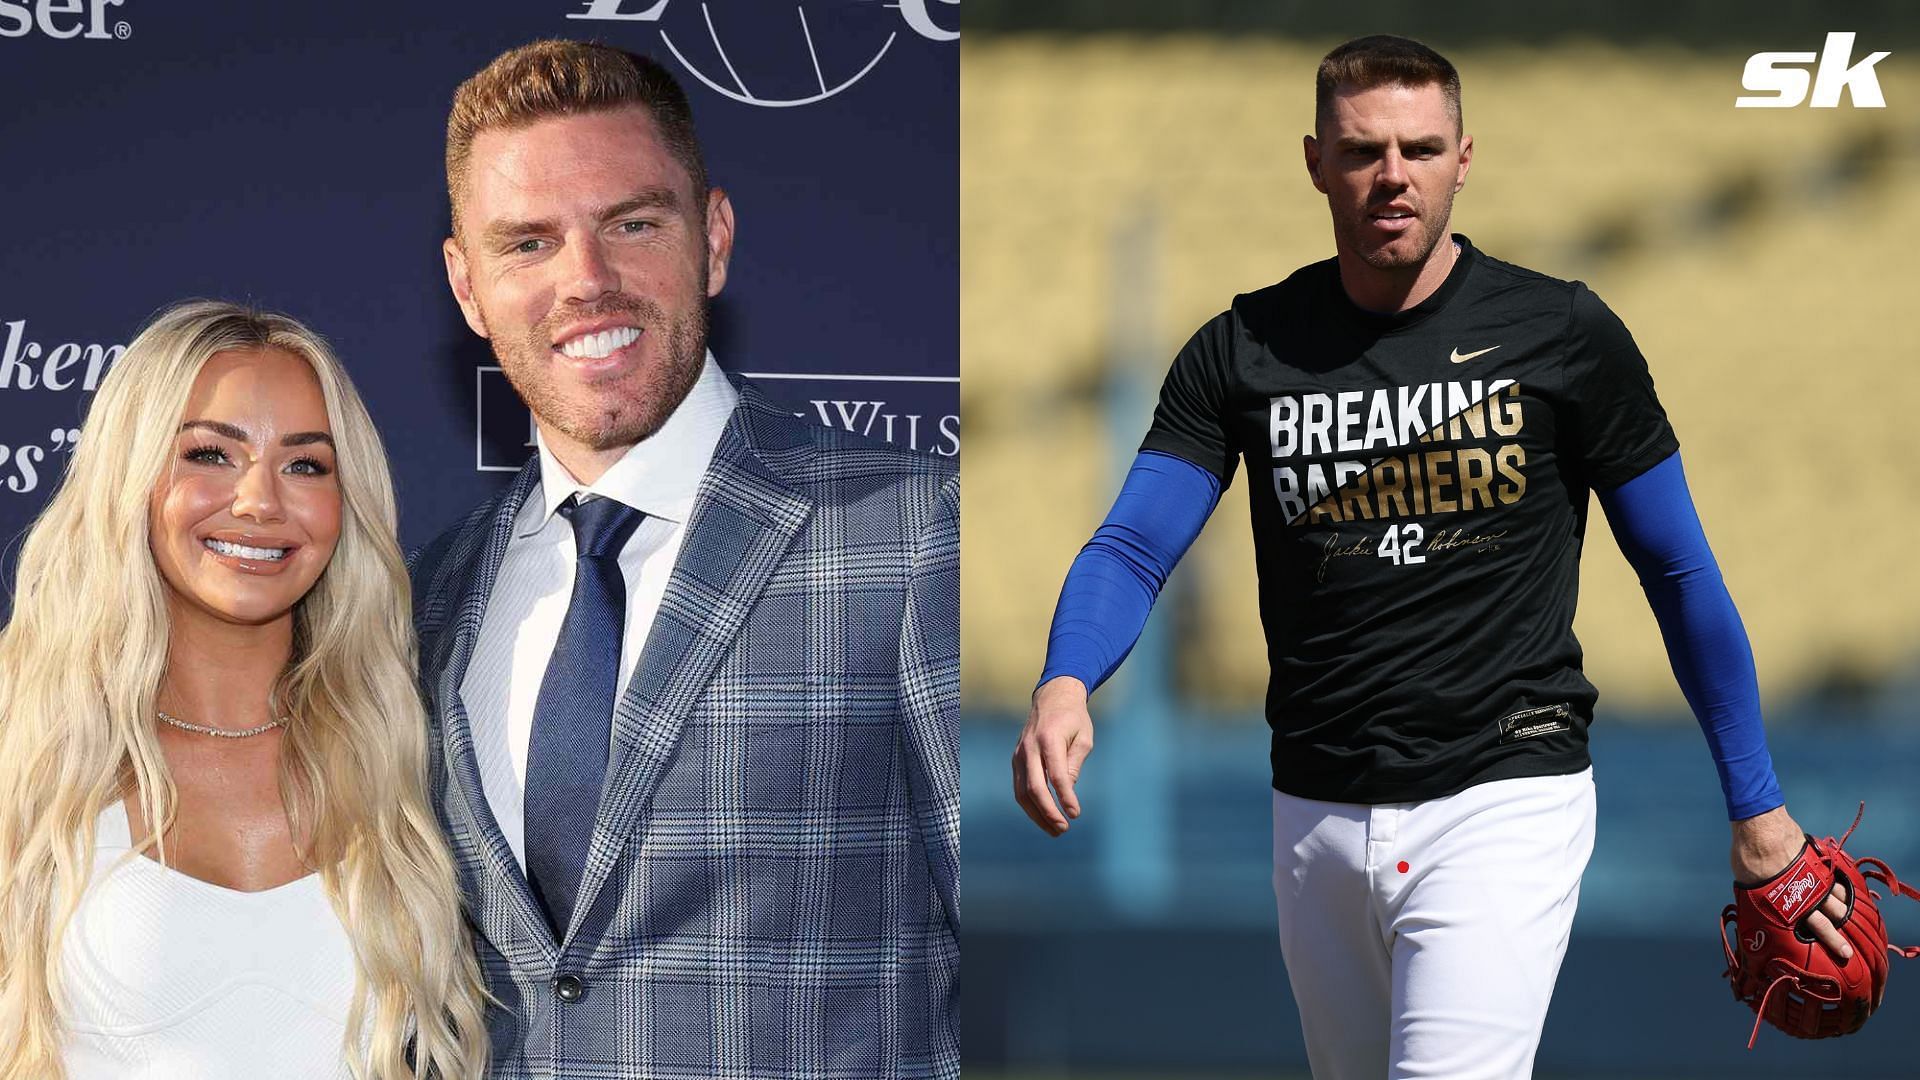 Freddie Freeman and his wife Chelsea showed off their stylish get-ups at a recent event